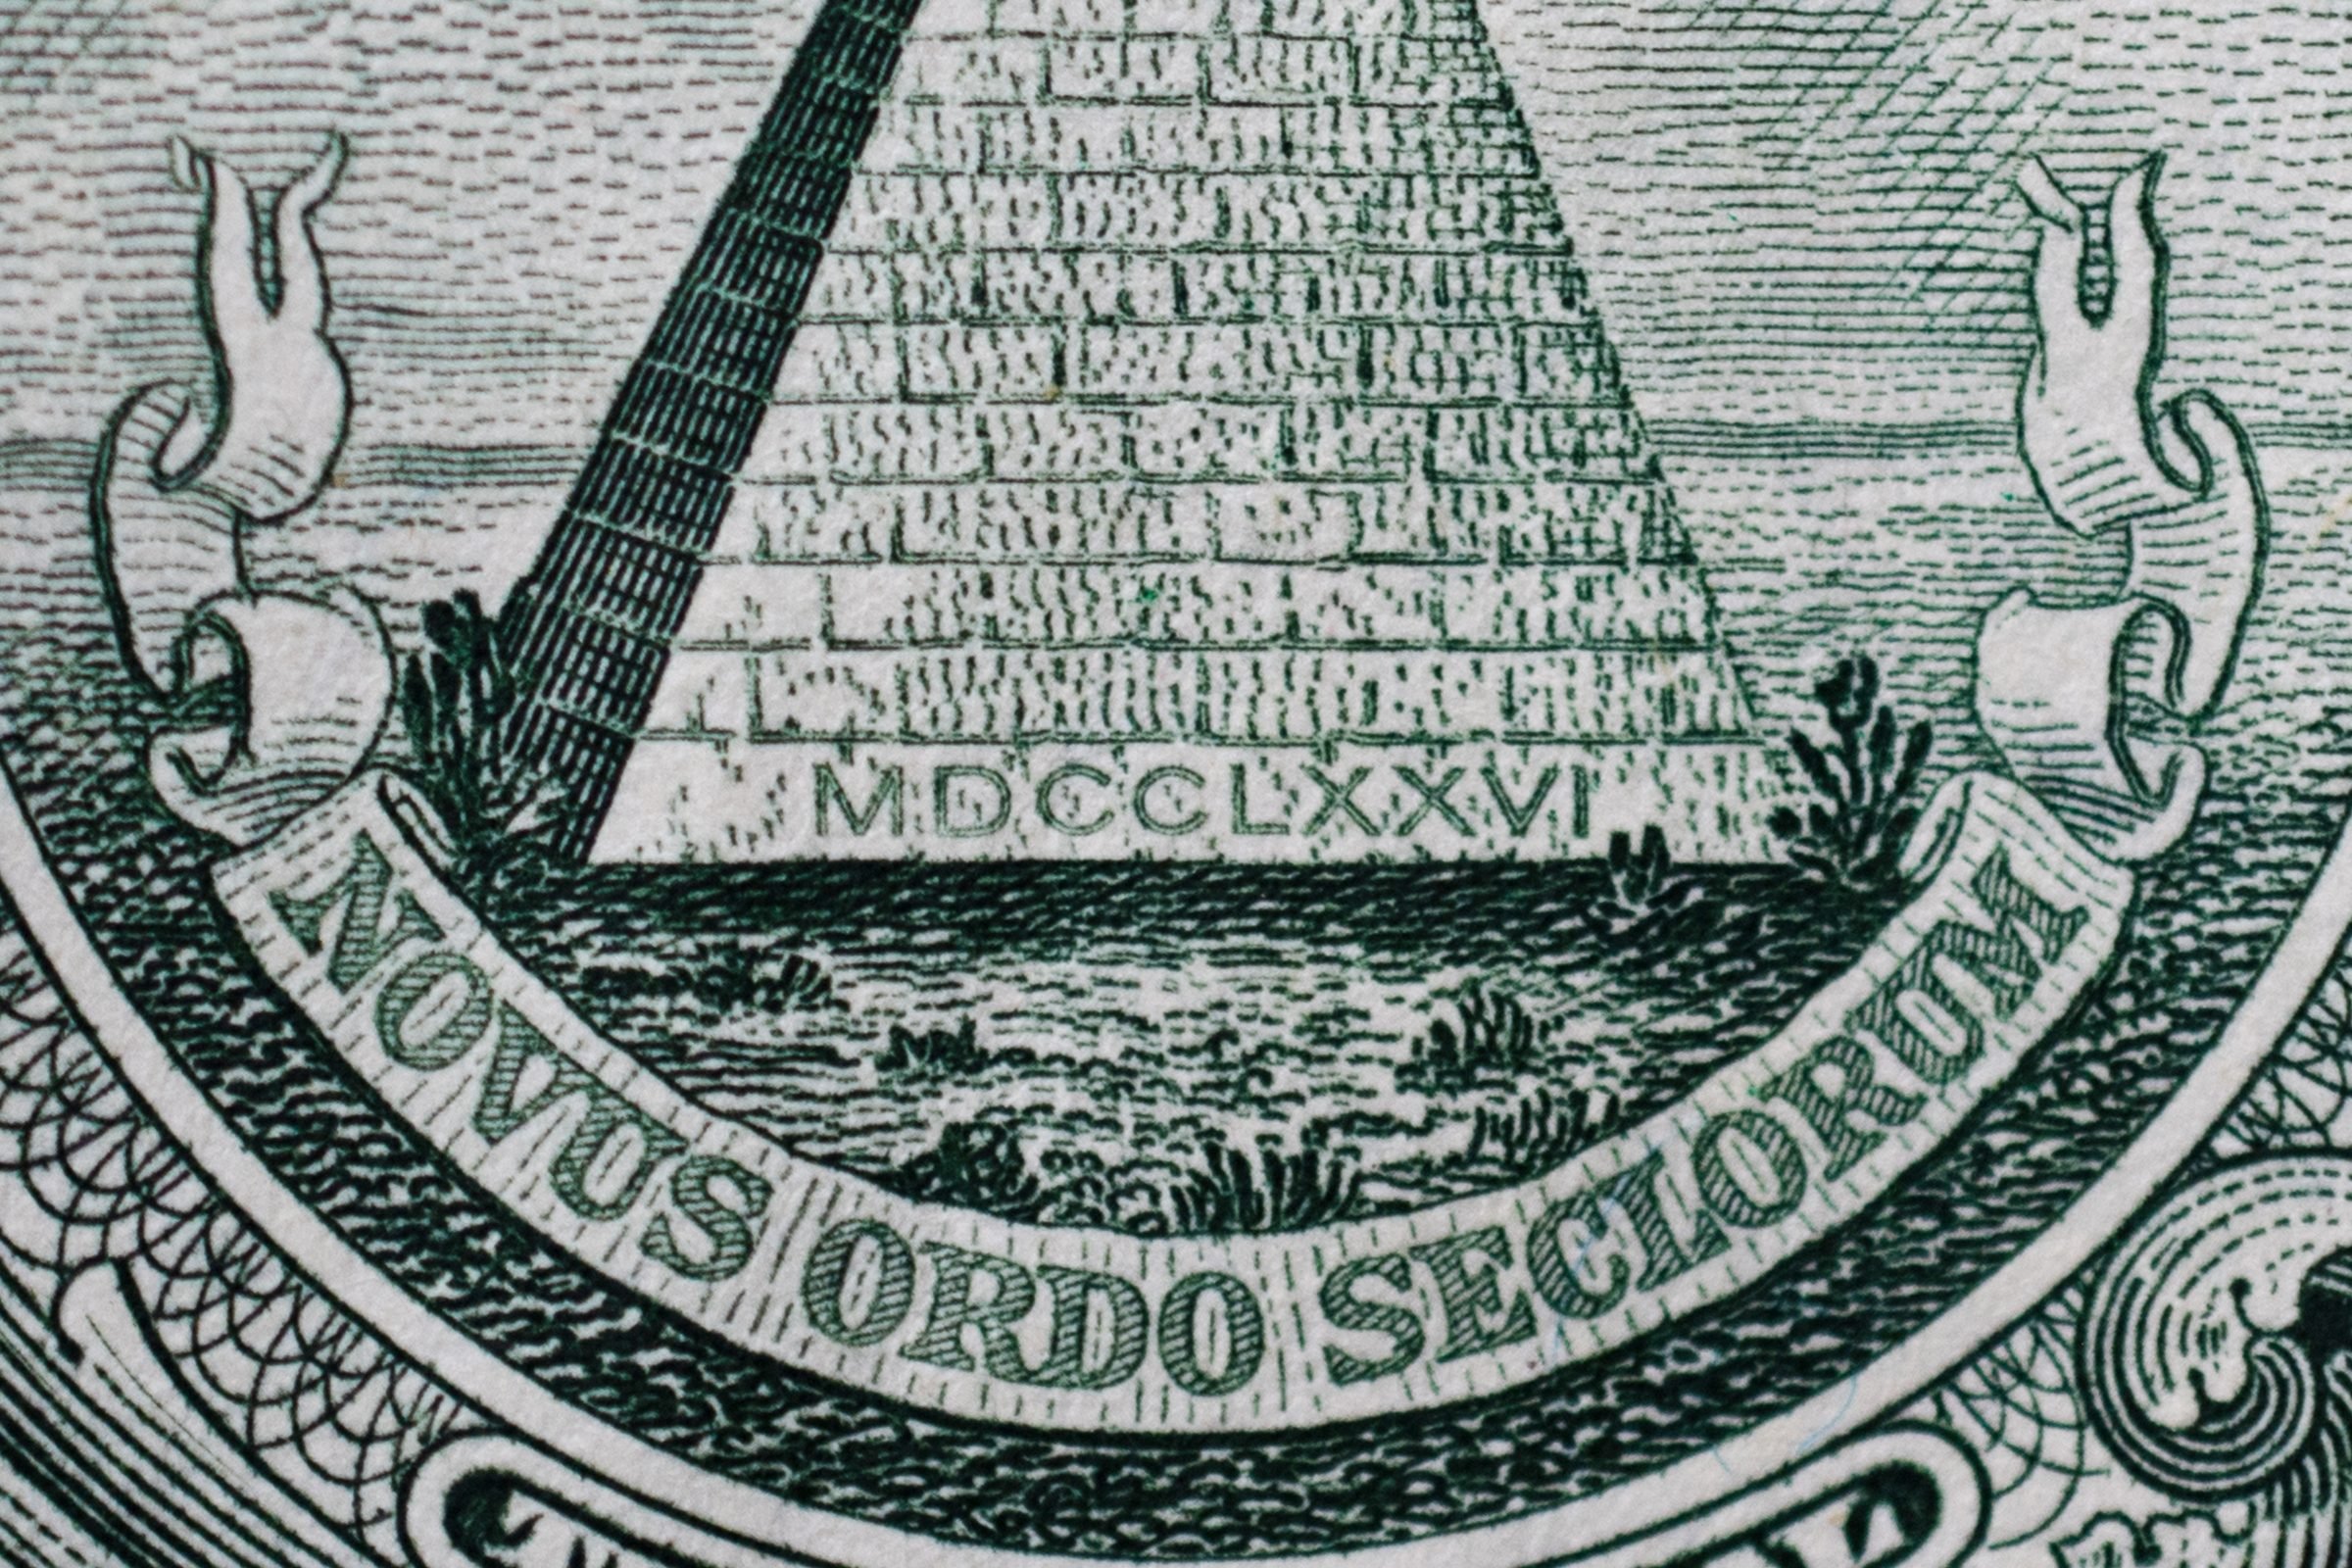 Dollar Bill Symbols: What They Mean